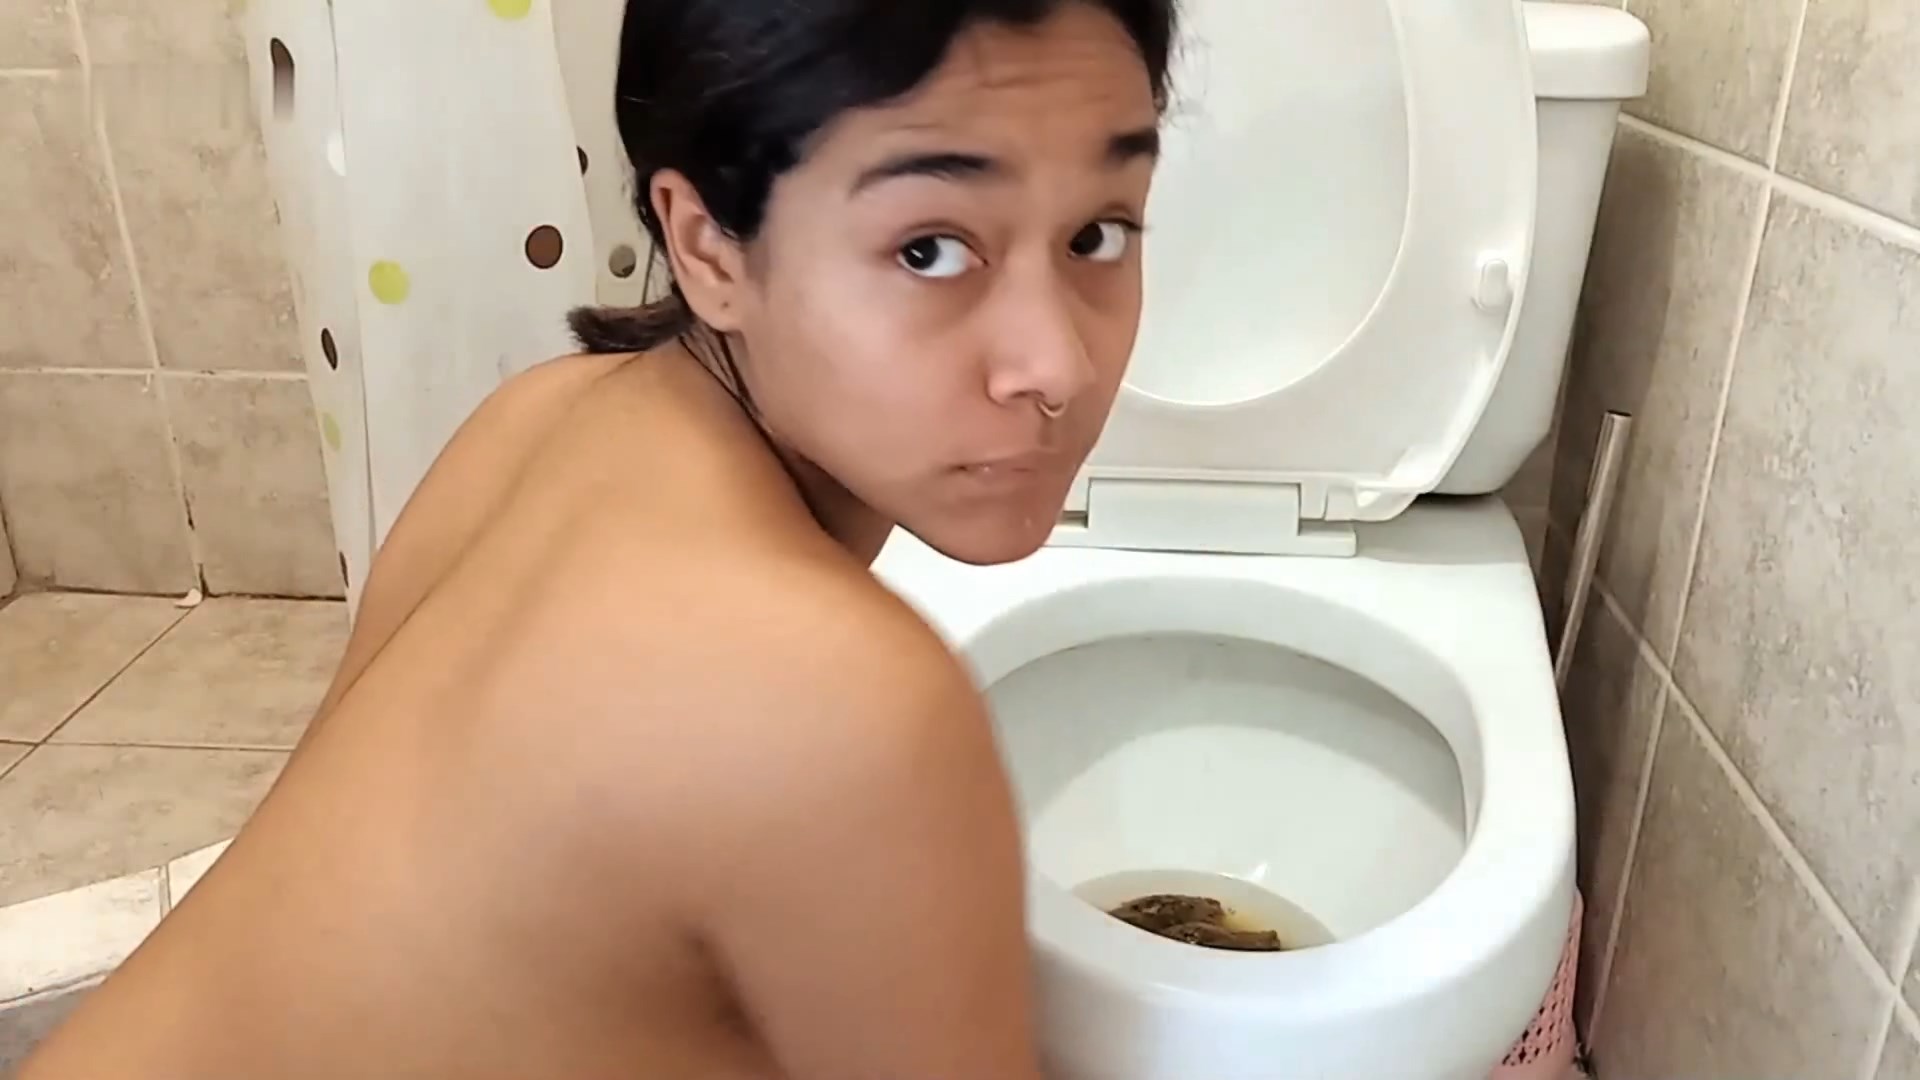 Dirty Potty Porn - Eating my dirty toilet, after pooing (Special scat porn request from our  premium user) $28.99 by Mirellabb from 11 - Extreme Scat Porn Site #1